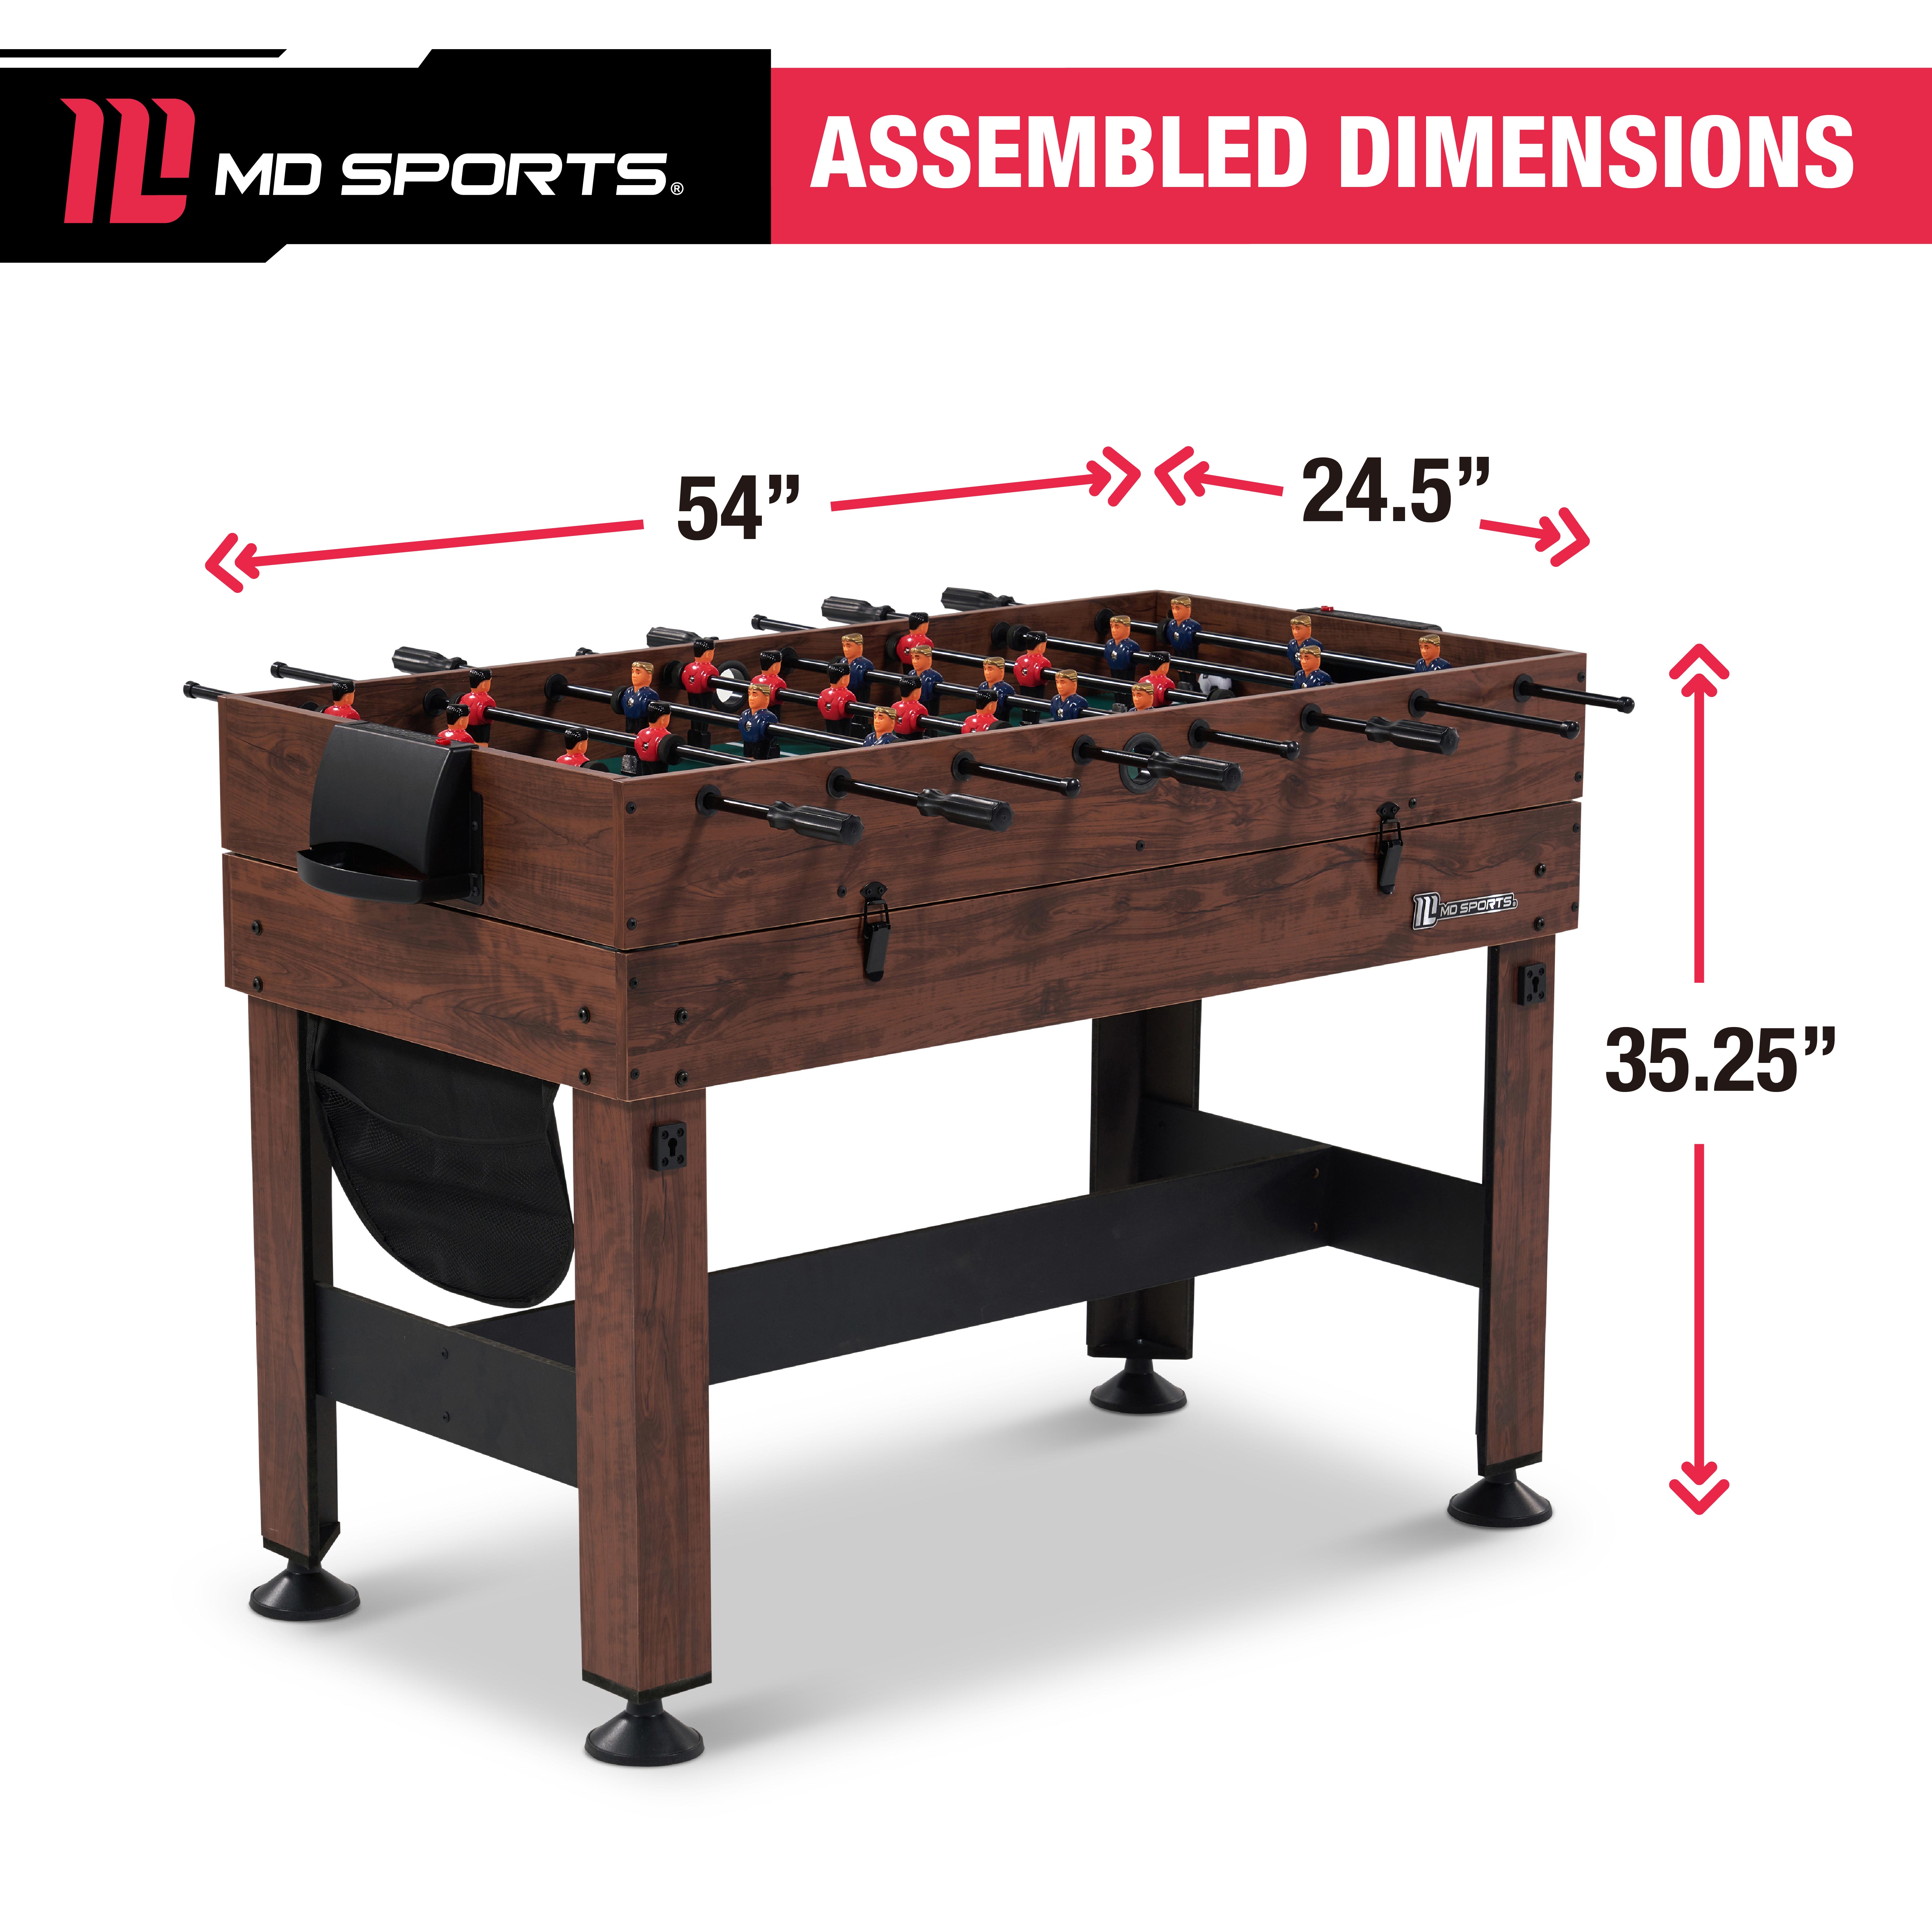 MD Sports 54" 4 in 1 Combo Game Table, Foosball, Hockey, Table Tennis, Billiards - image 4 of 13